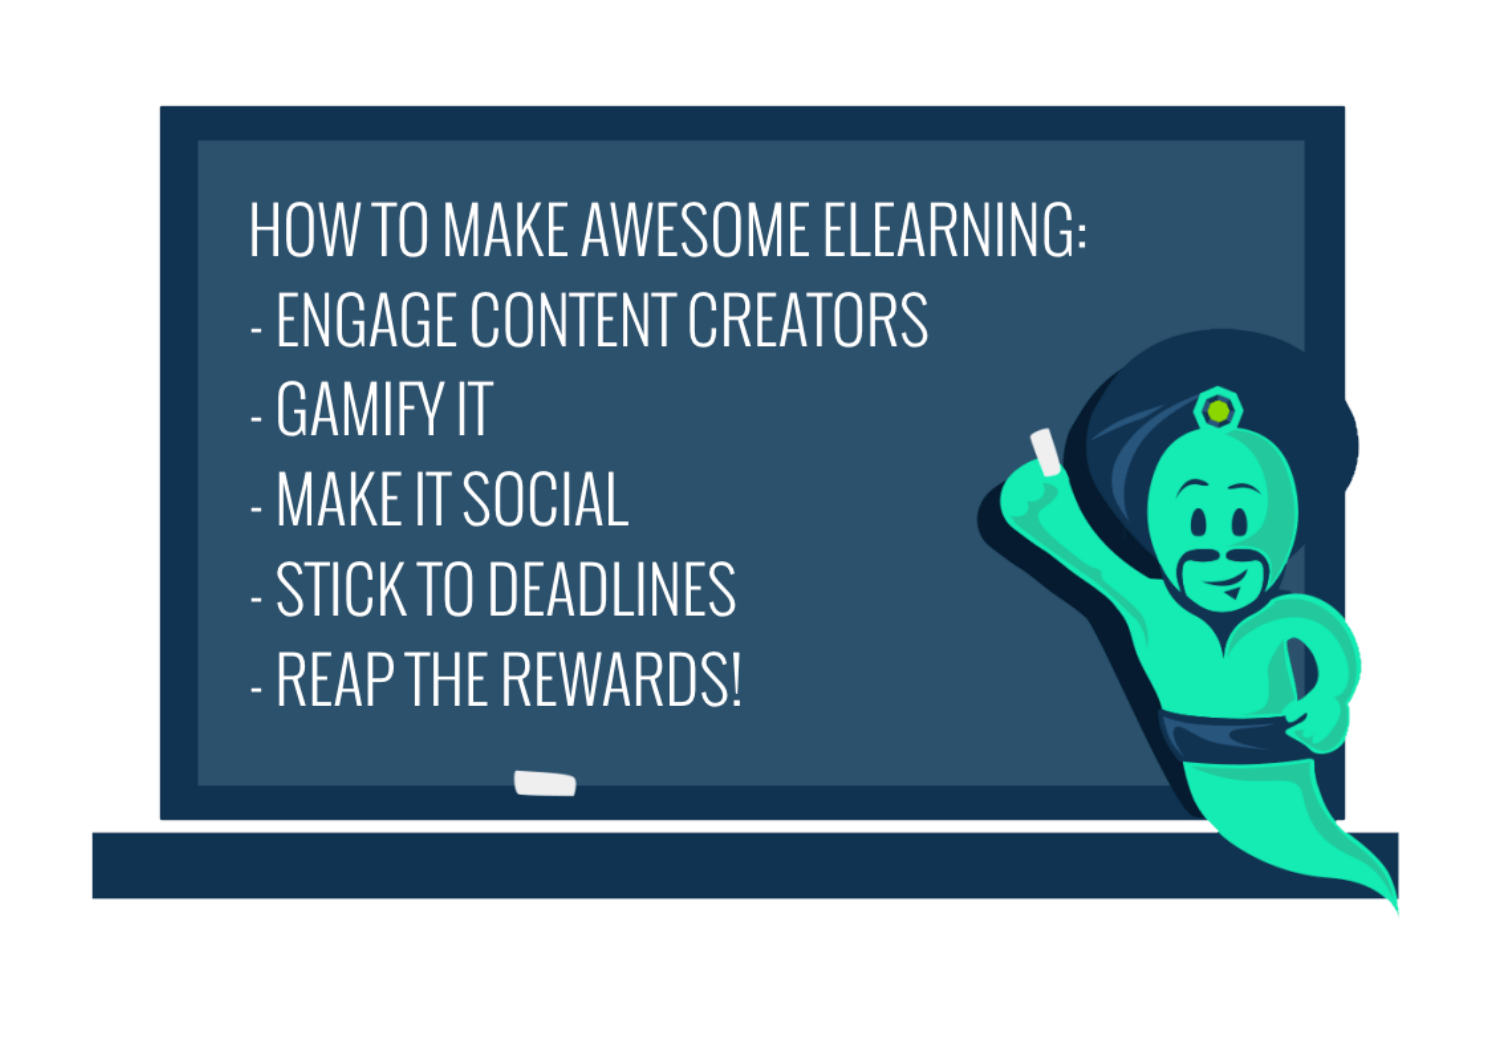 Gamify eLearning Development To Engage Content Creators